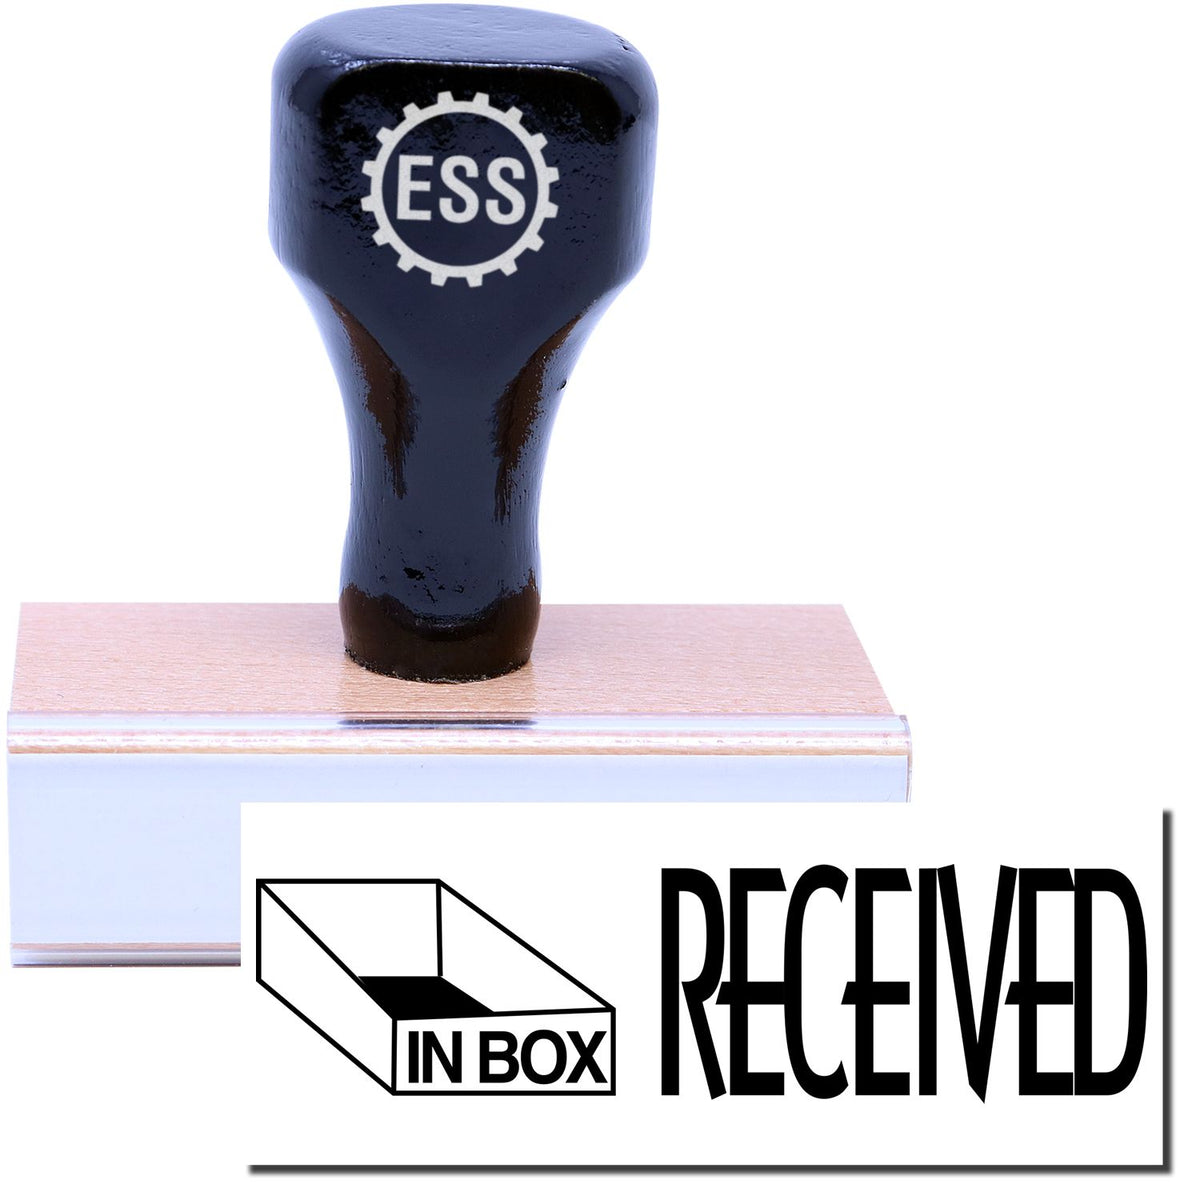 A stock office rubber stamp with a stamped image showing how the text &quot;RECEIVED&quot; with a small graphic of an office inbox on the left side is displayed after stamping.